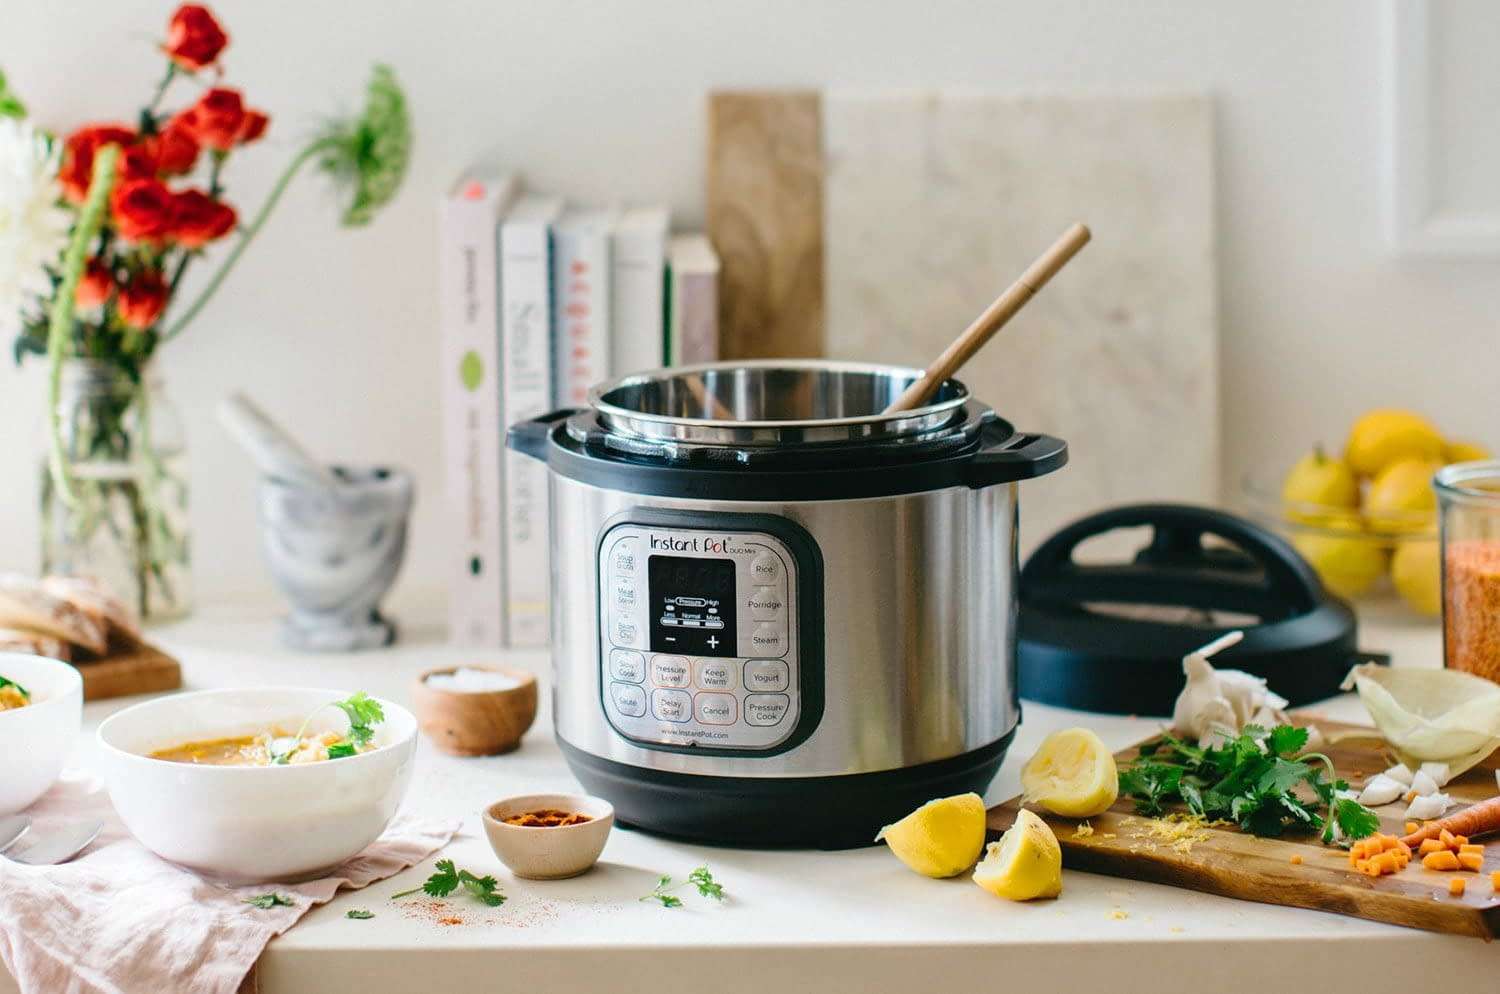 How Long Does Instant Pot Take to Preheat